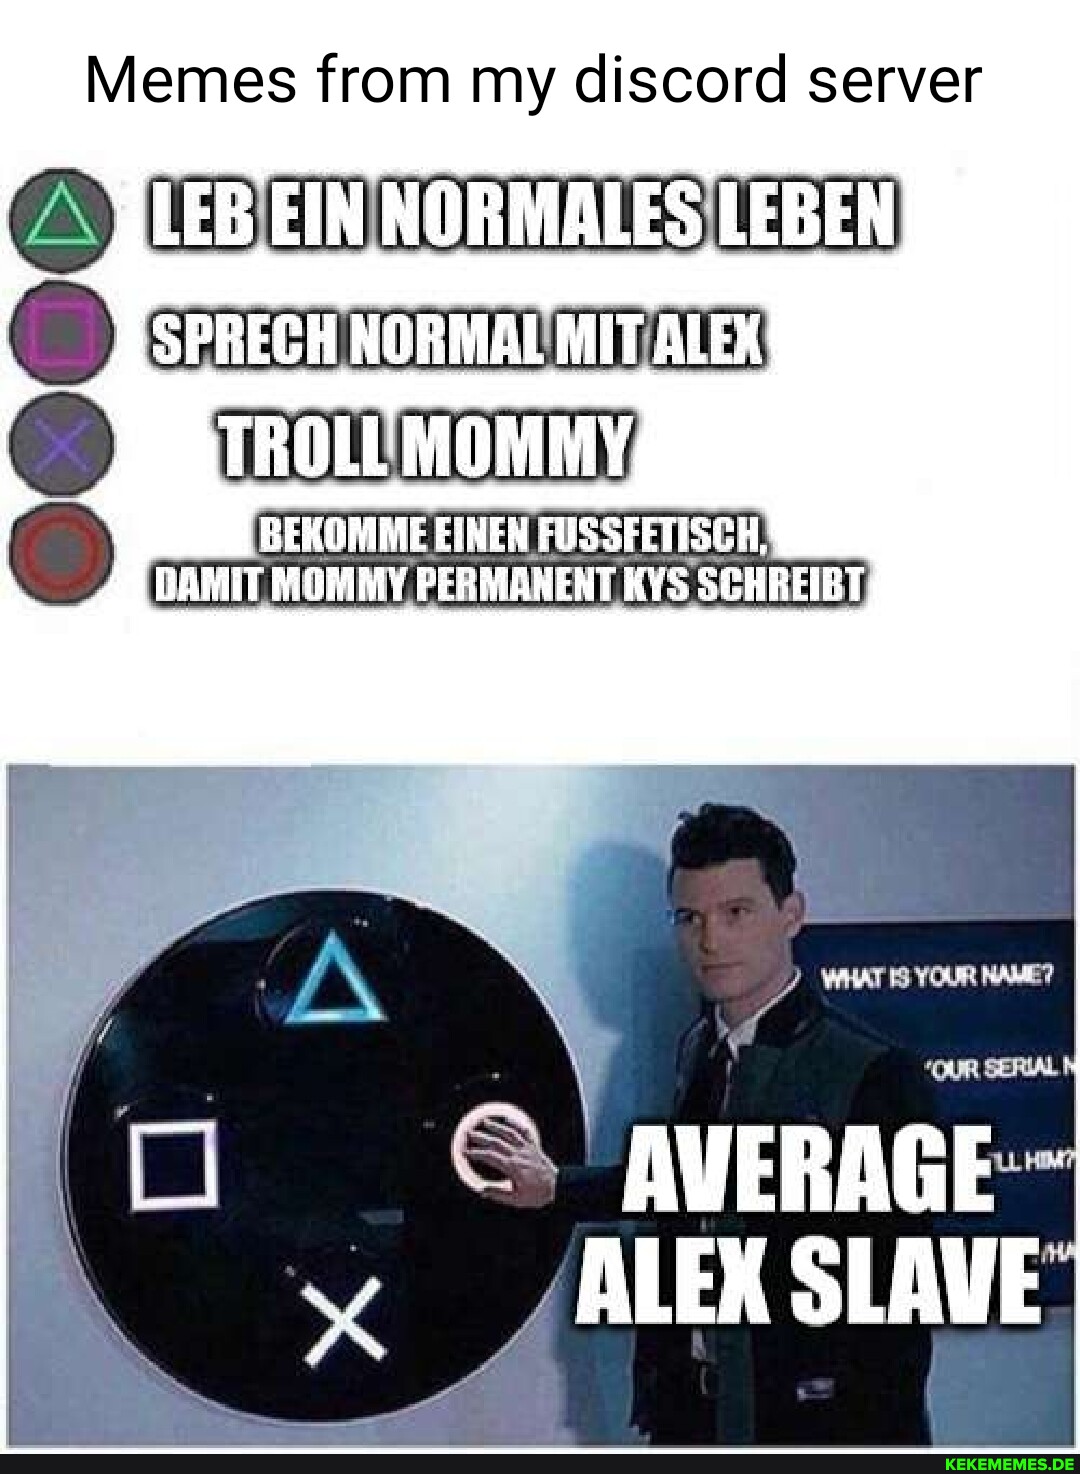 Memes from my discord server -_JESPRECH NORMAL MIT ALEXI TROLL MOMMY BEKOMME EIN